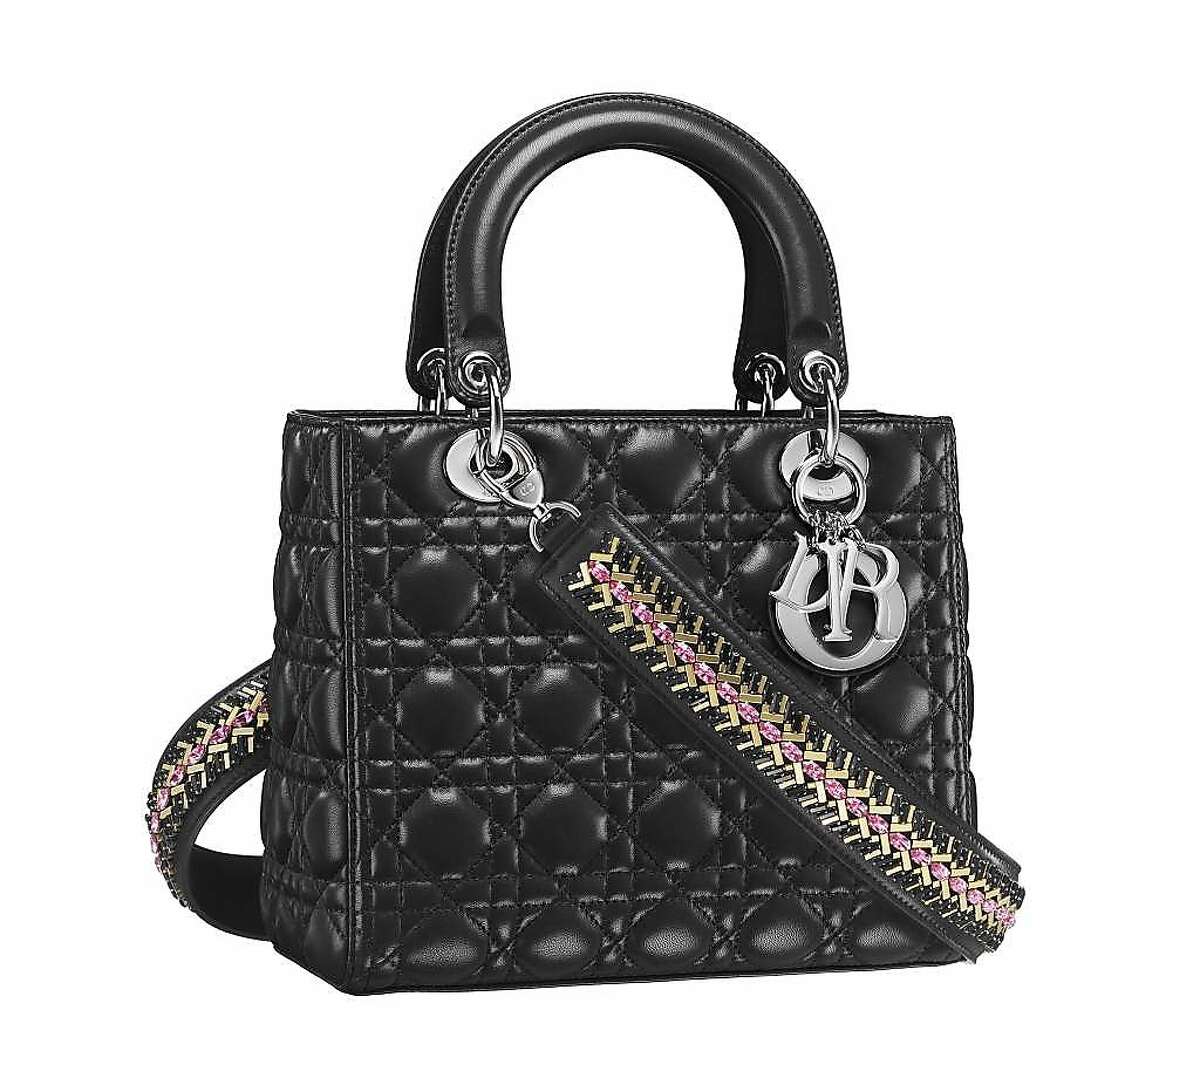 The calfskin Lady Dior�handbag ($4,900) reflects motifs from �the fashion house's history: good luck charms, and the cannage (cane-weaving technique) in the crystal embroidered strap.